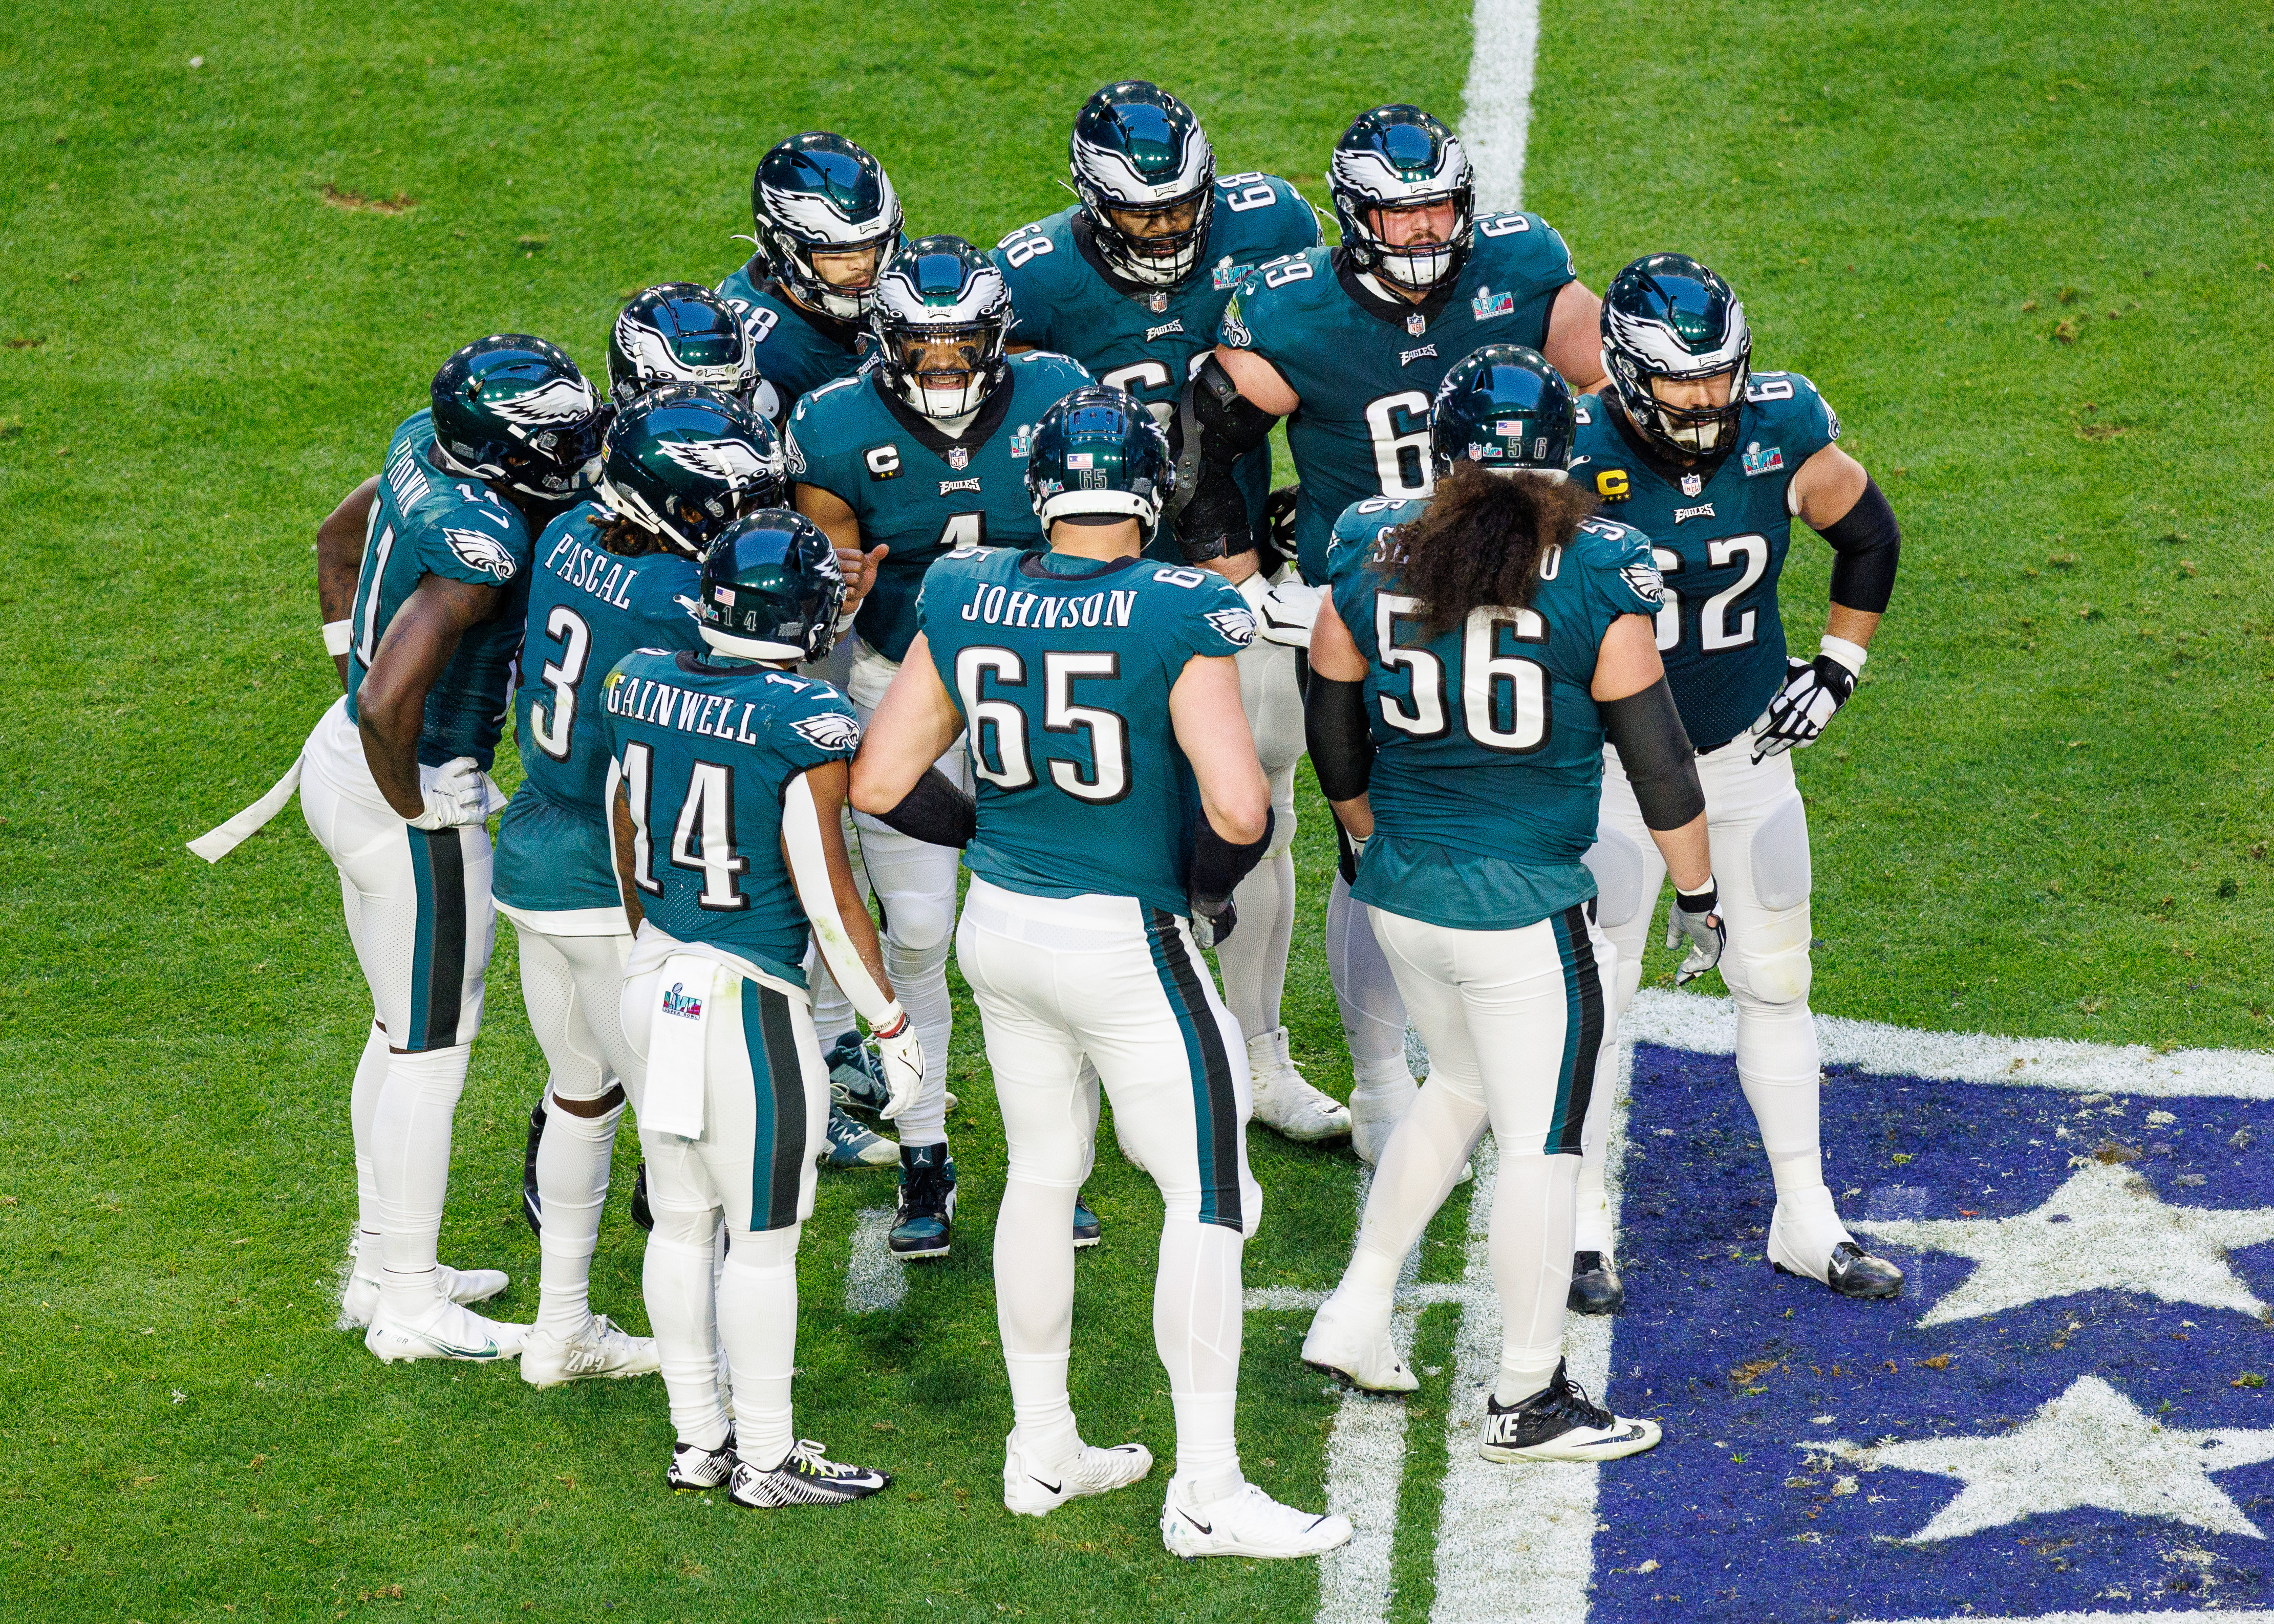 will eagles game be on peacock